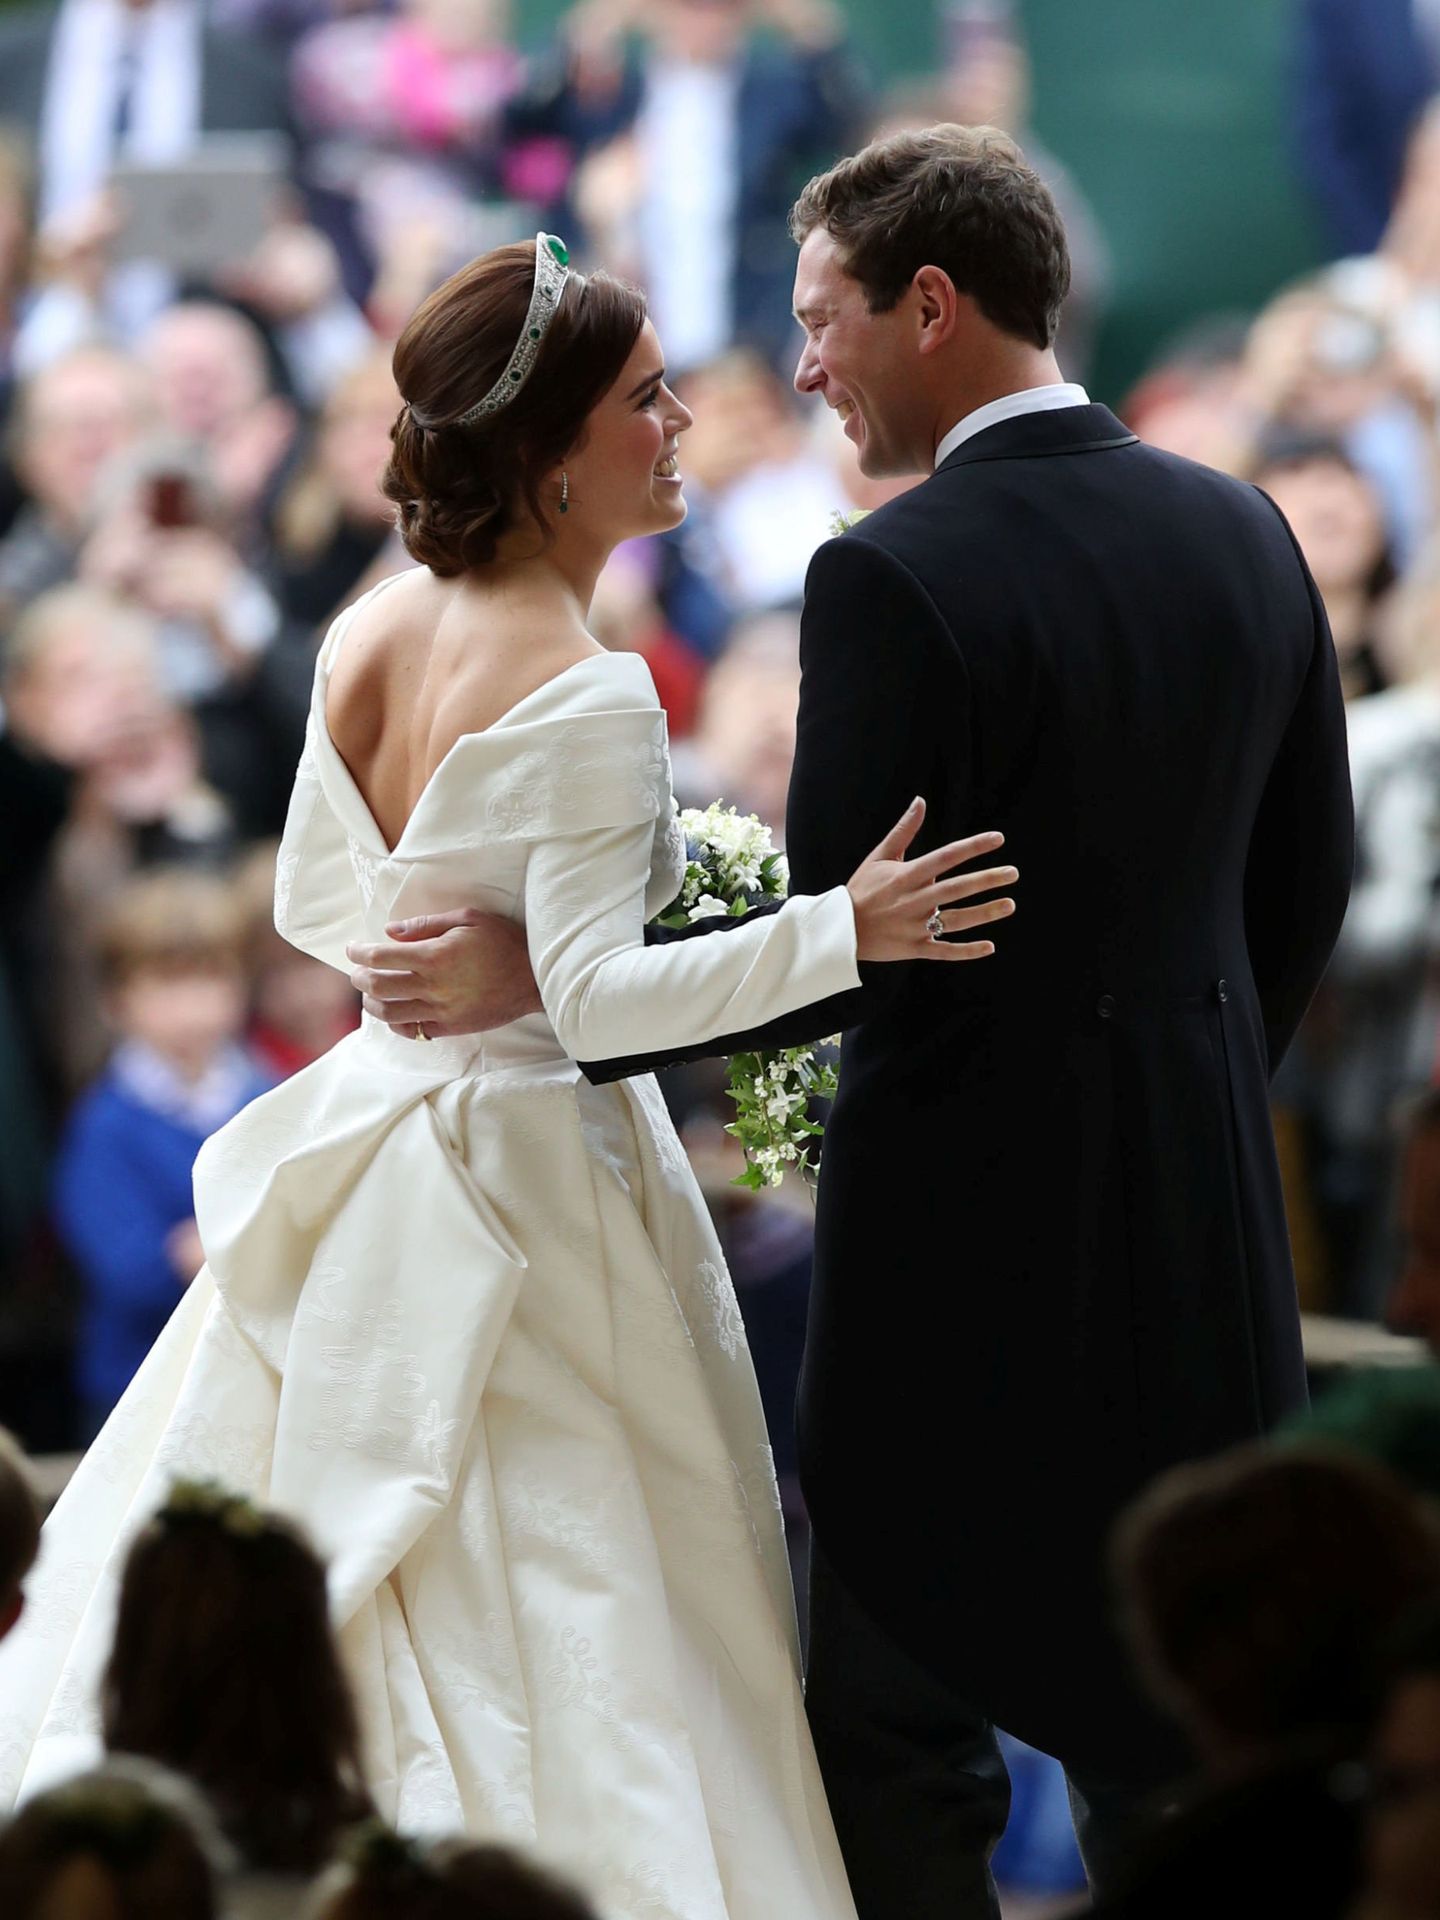 Princess Eugenie and her new husband Jack Brooksbank kiss as they leave St George's Chapel in Windsor Castle following their wedding, Windsor, Britain, October 12, 2018. Yui Mok Pool via REUTERS